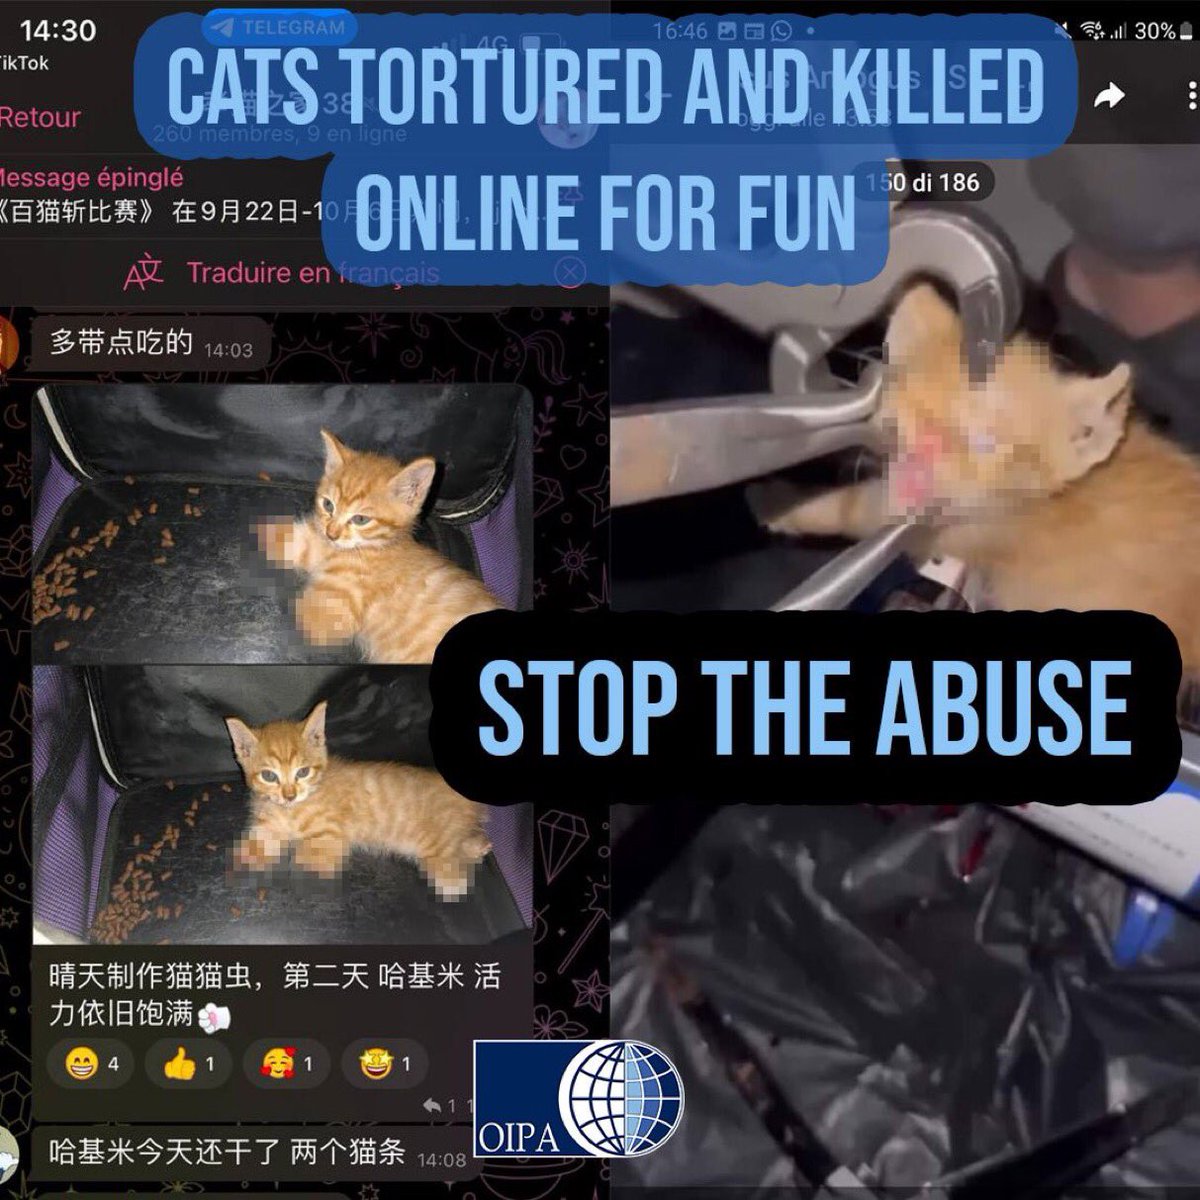 #CatsAreFamily
In #China they’re the victims of #crime by #evil perverts.
#CatsAreFamily 
Stop #CatAbusersChina 
#BoycottChina